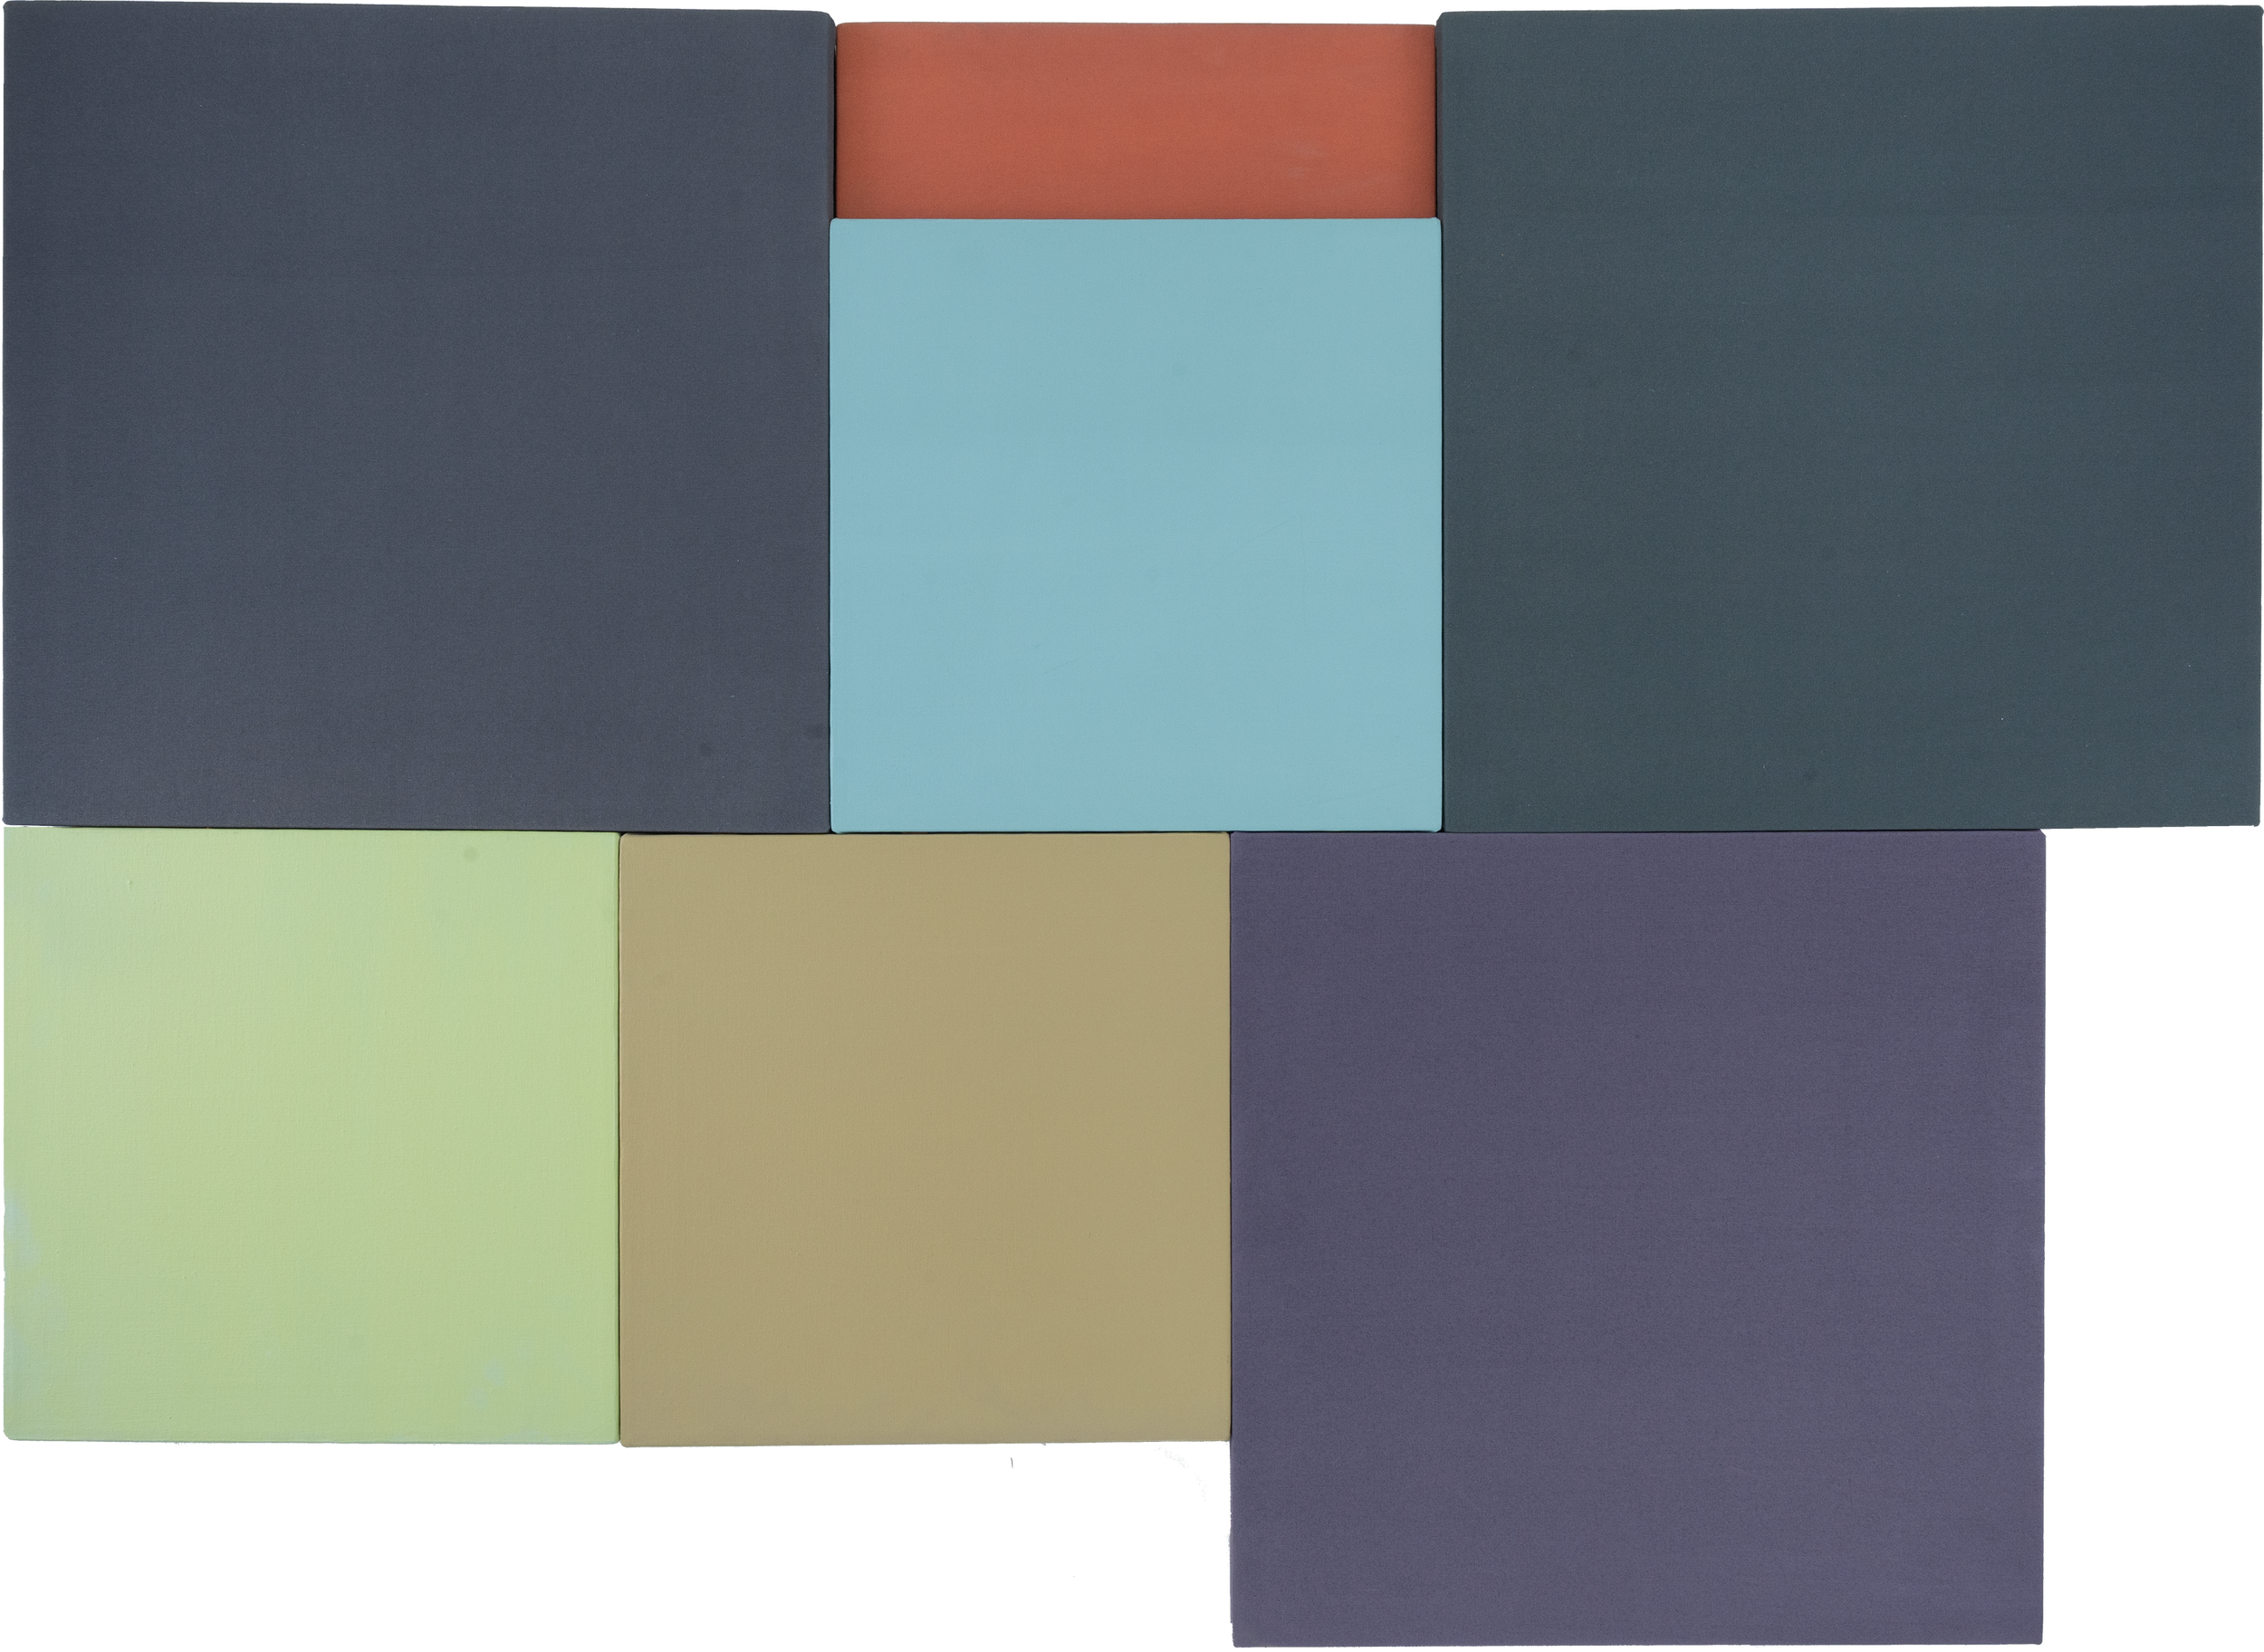 Seven Colors, 1972, acrylic on canvas, 46x63 inches